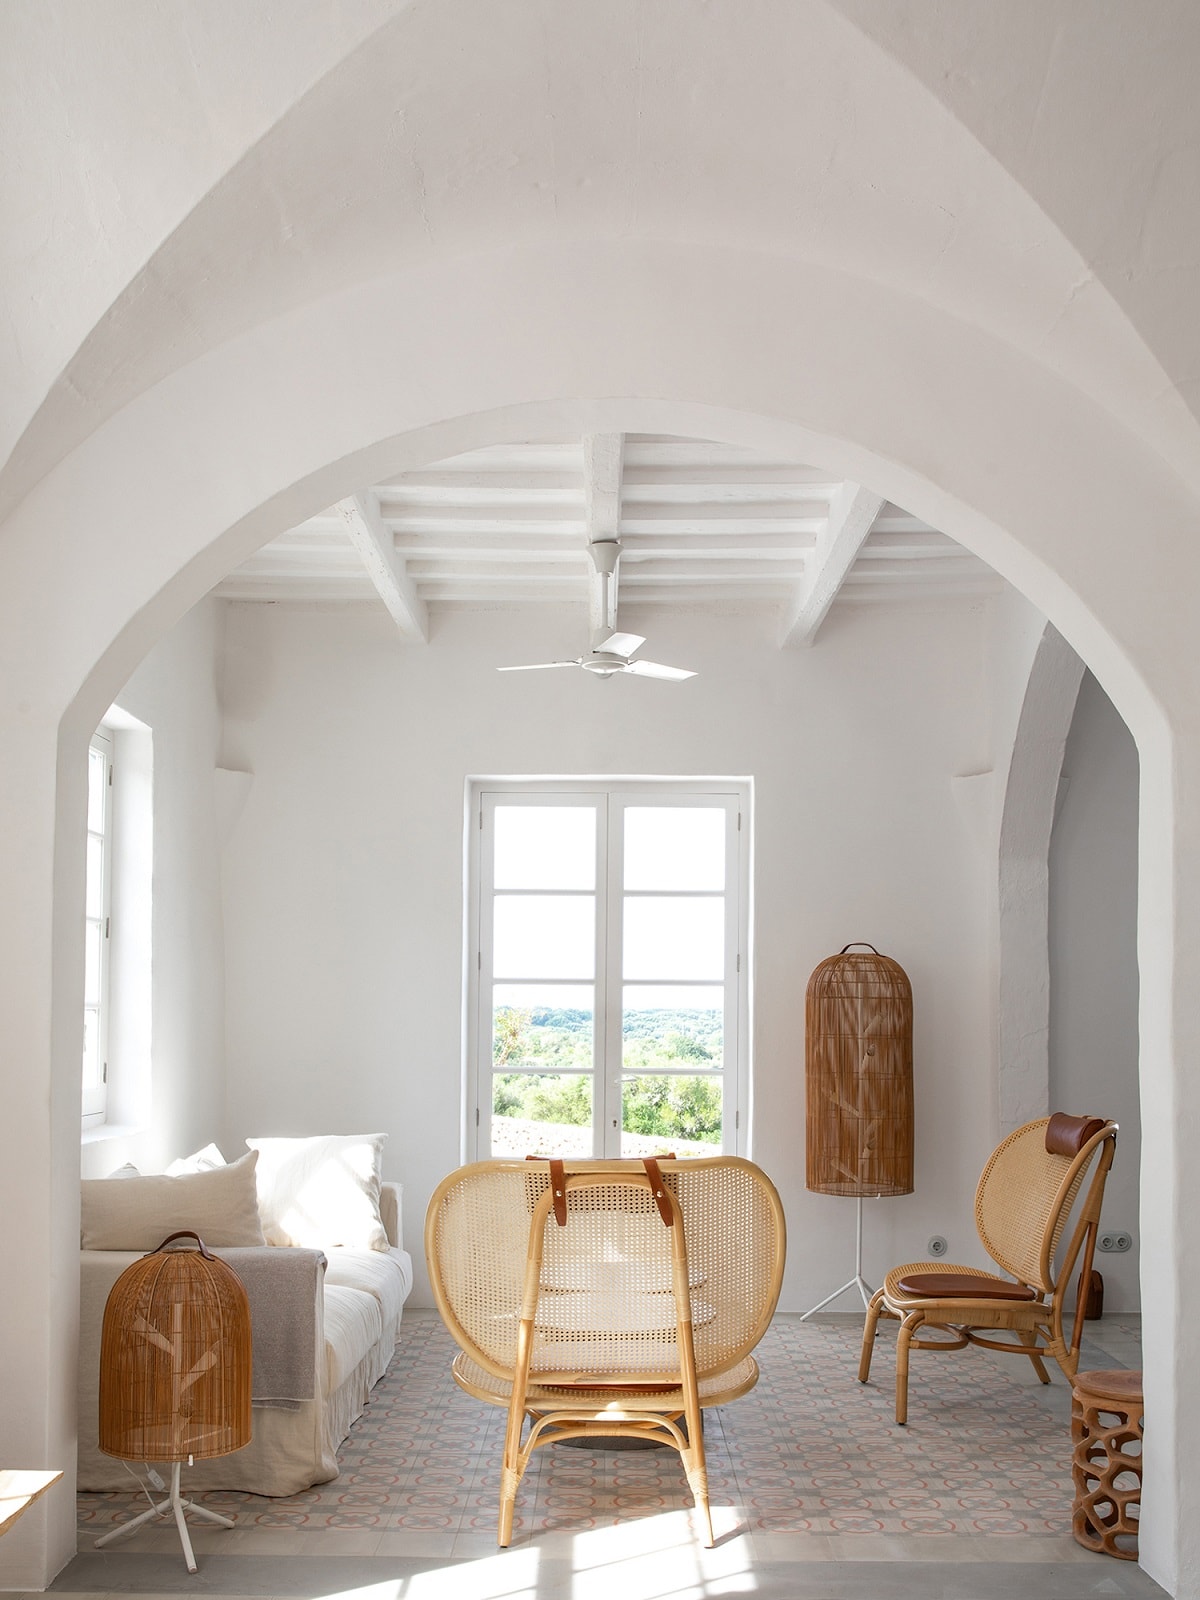 The Finca Es Bec d’Aguila: Mediterranean 19th Century Countryside Estate in Menorca Renovated by Atelier Du Pont